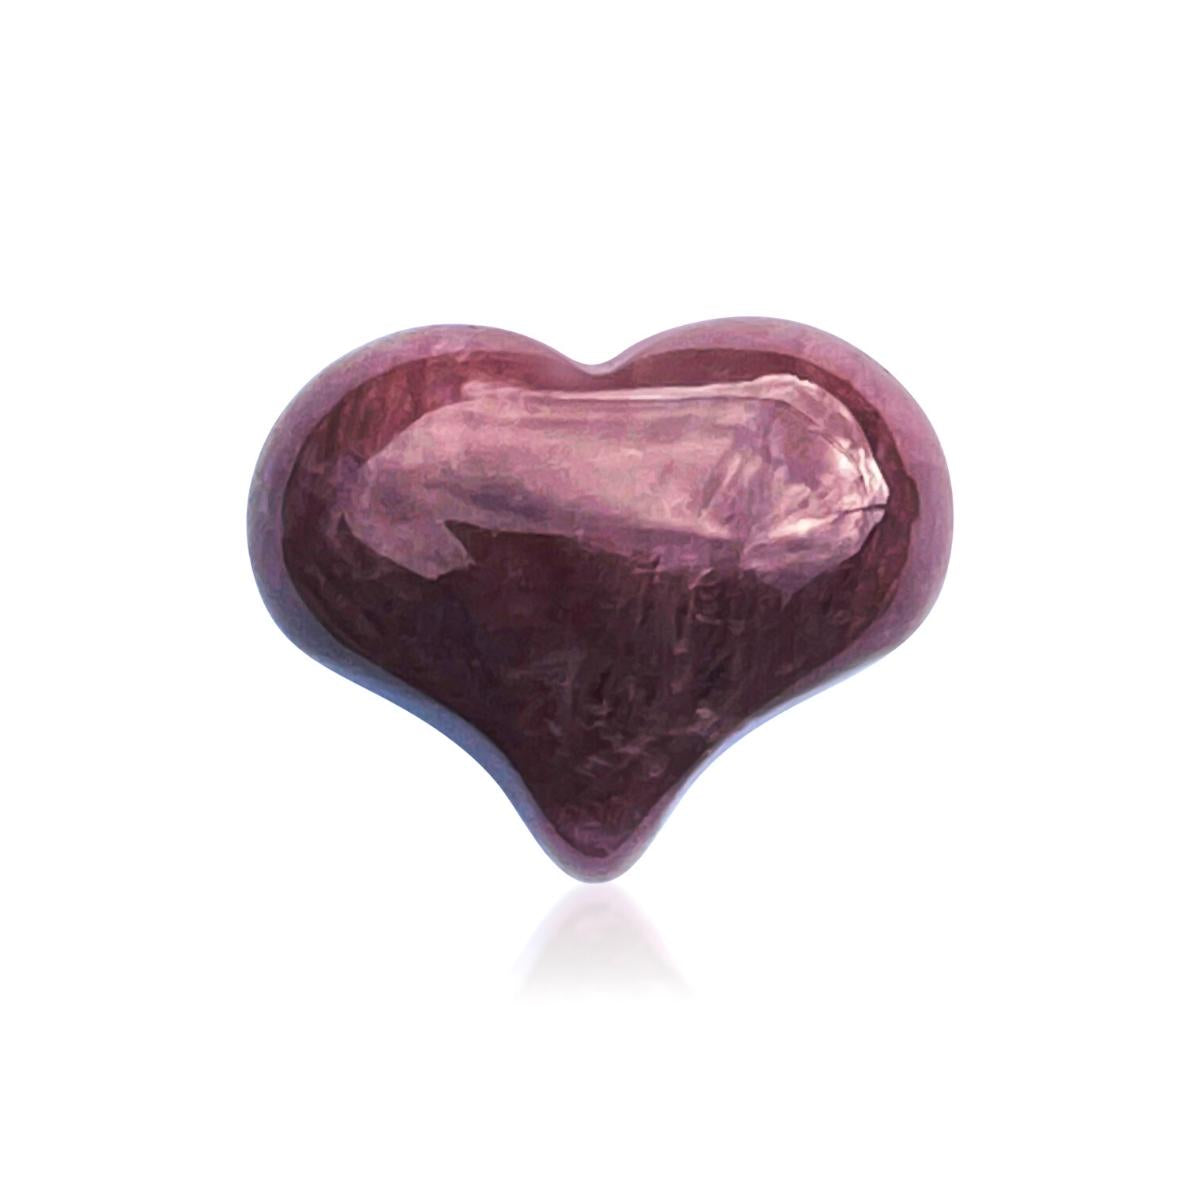 Strawberry Quartz Heart Shaped Healing Gemstone for Joy. Strawberry Quartz is primarily a Stone of Joy. Strawberry Quartz enables us to see the happy, beautiful and pleasant aspects of Life. It increases optimism and positive thinking. 